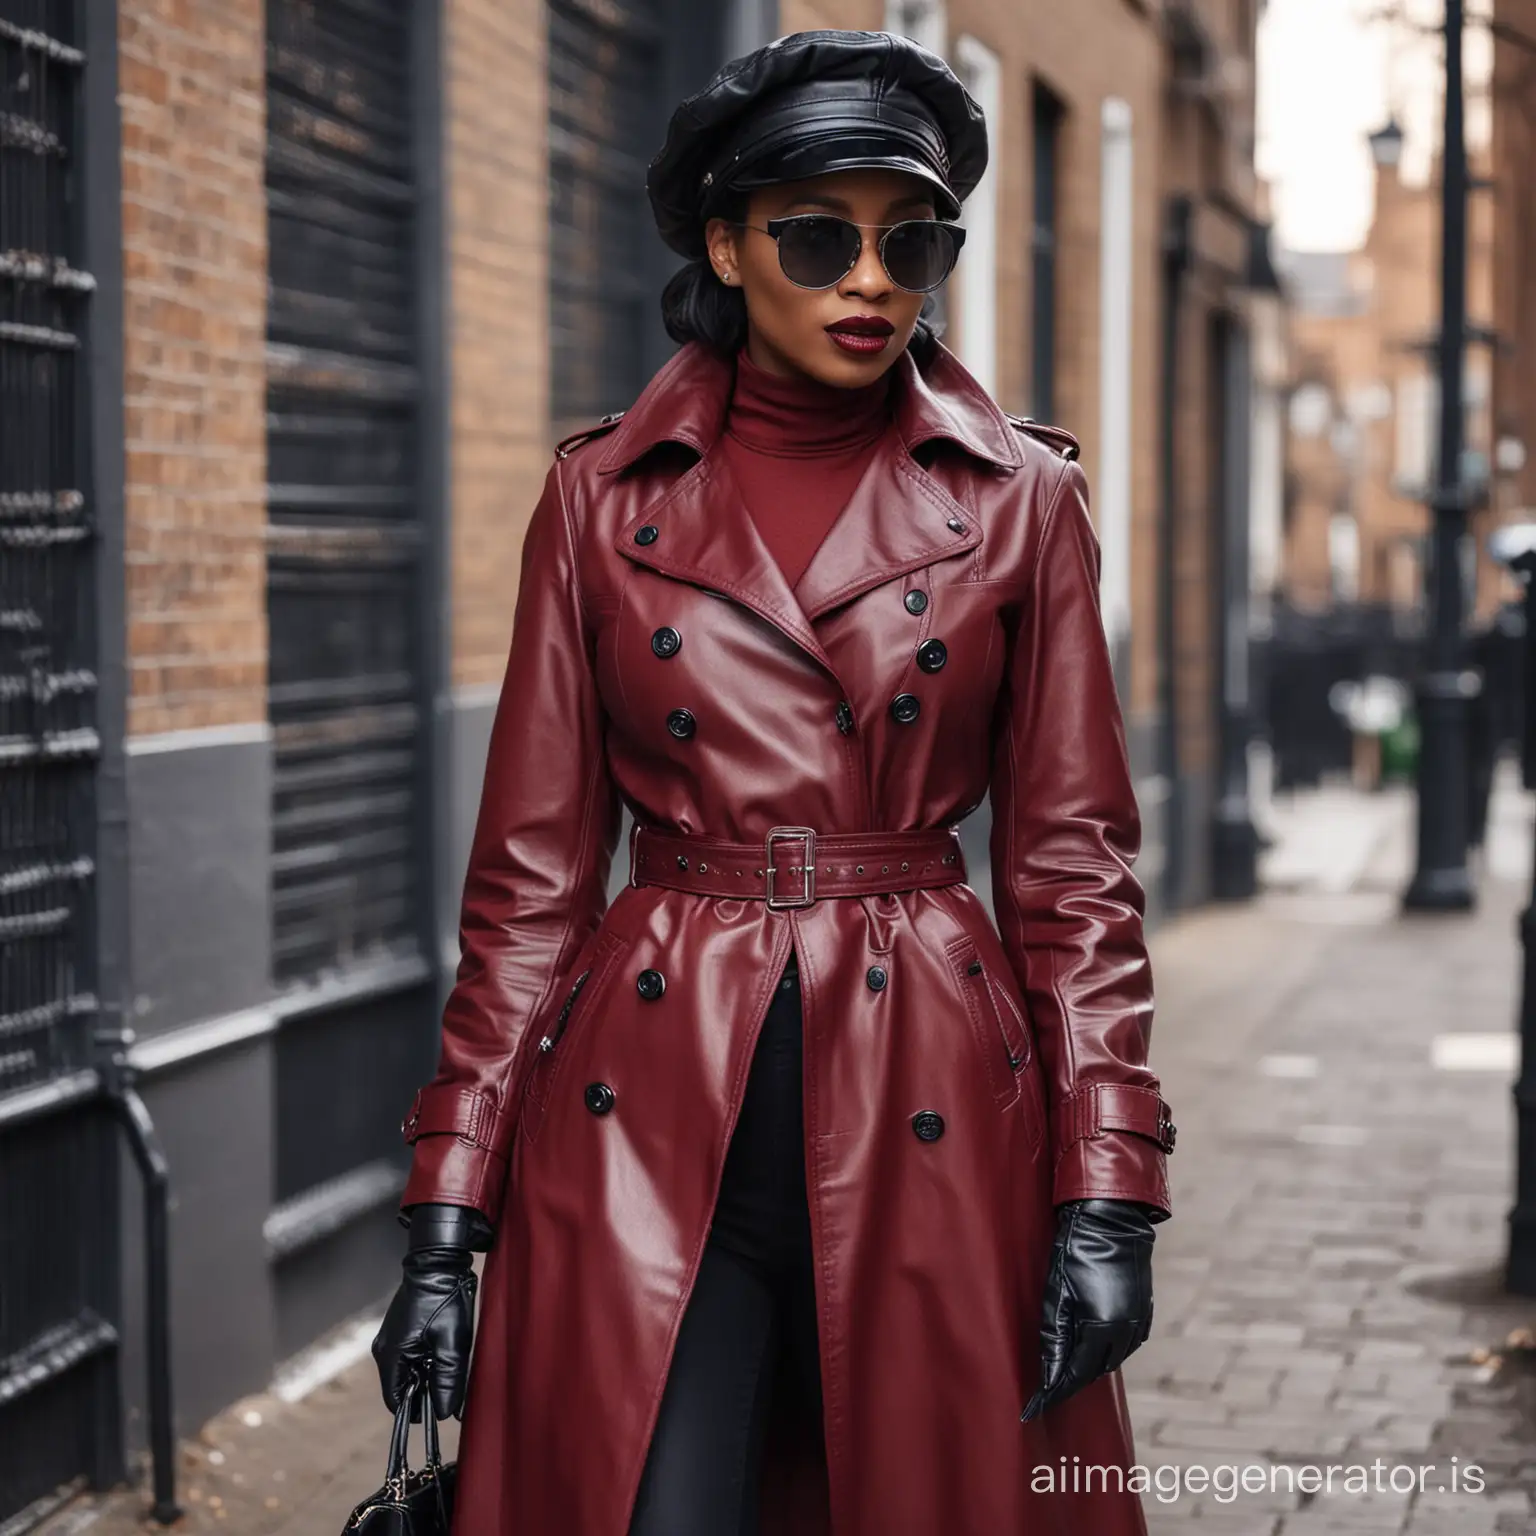 ebony woman in dark red leather trench coat, leather gloves, sunglasses, black lipstick, black leather masters cap, leather studded dog collar